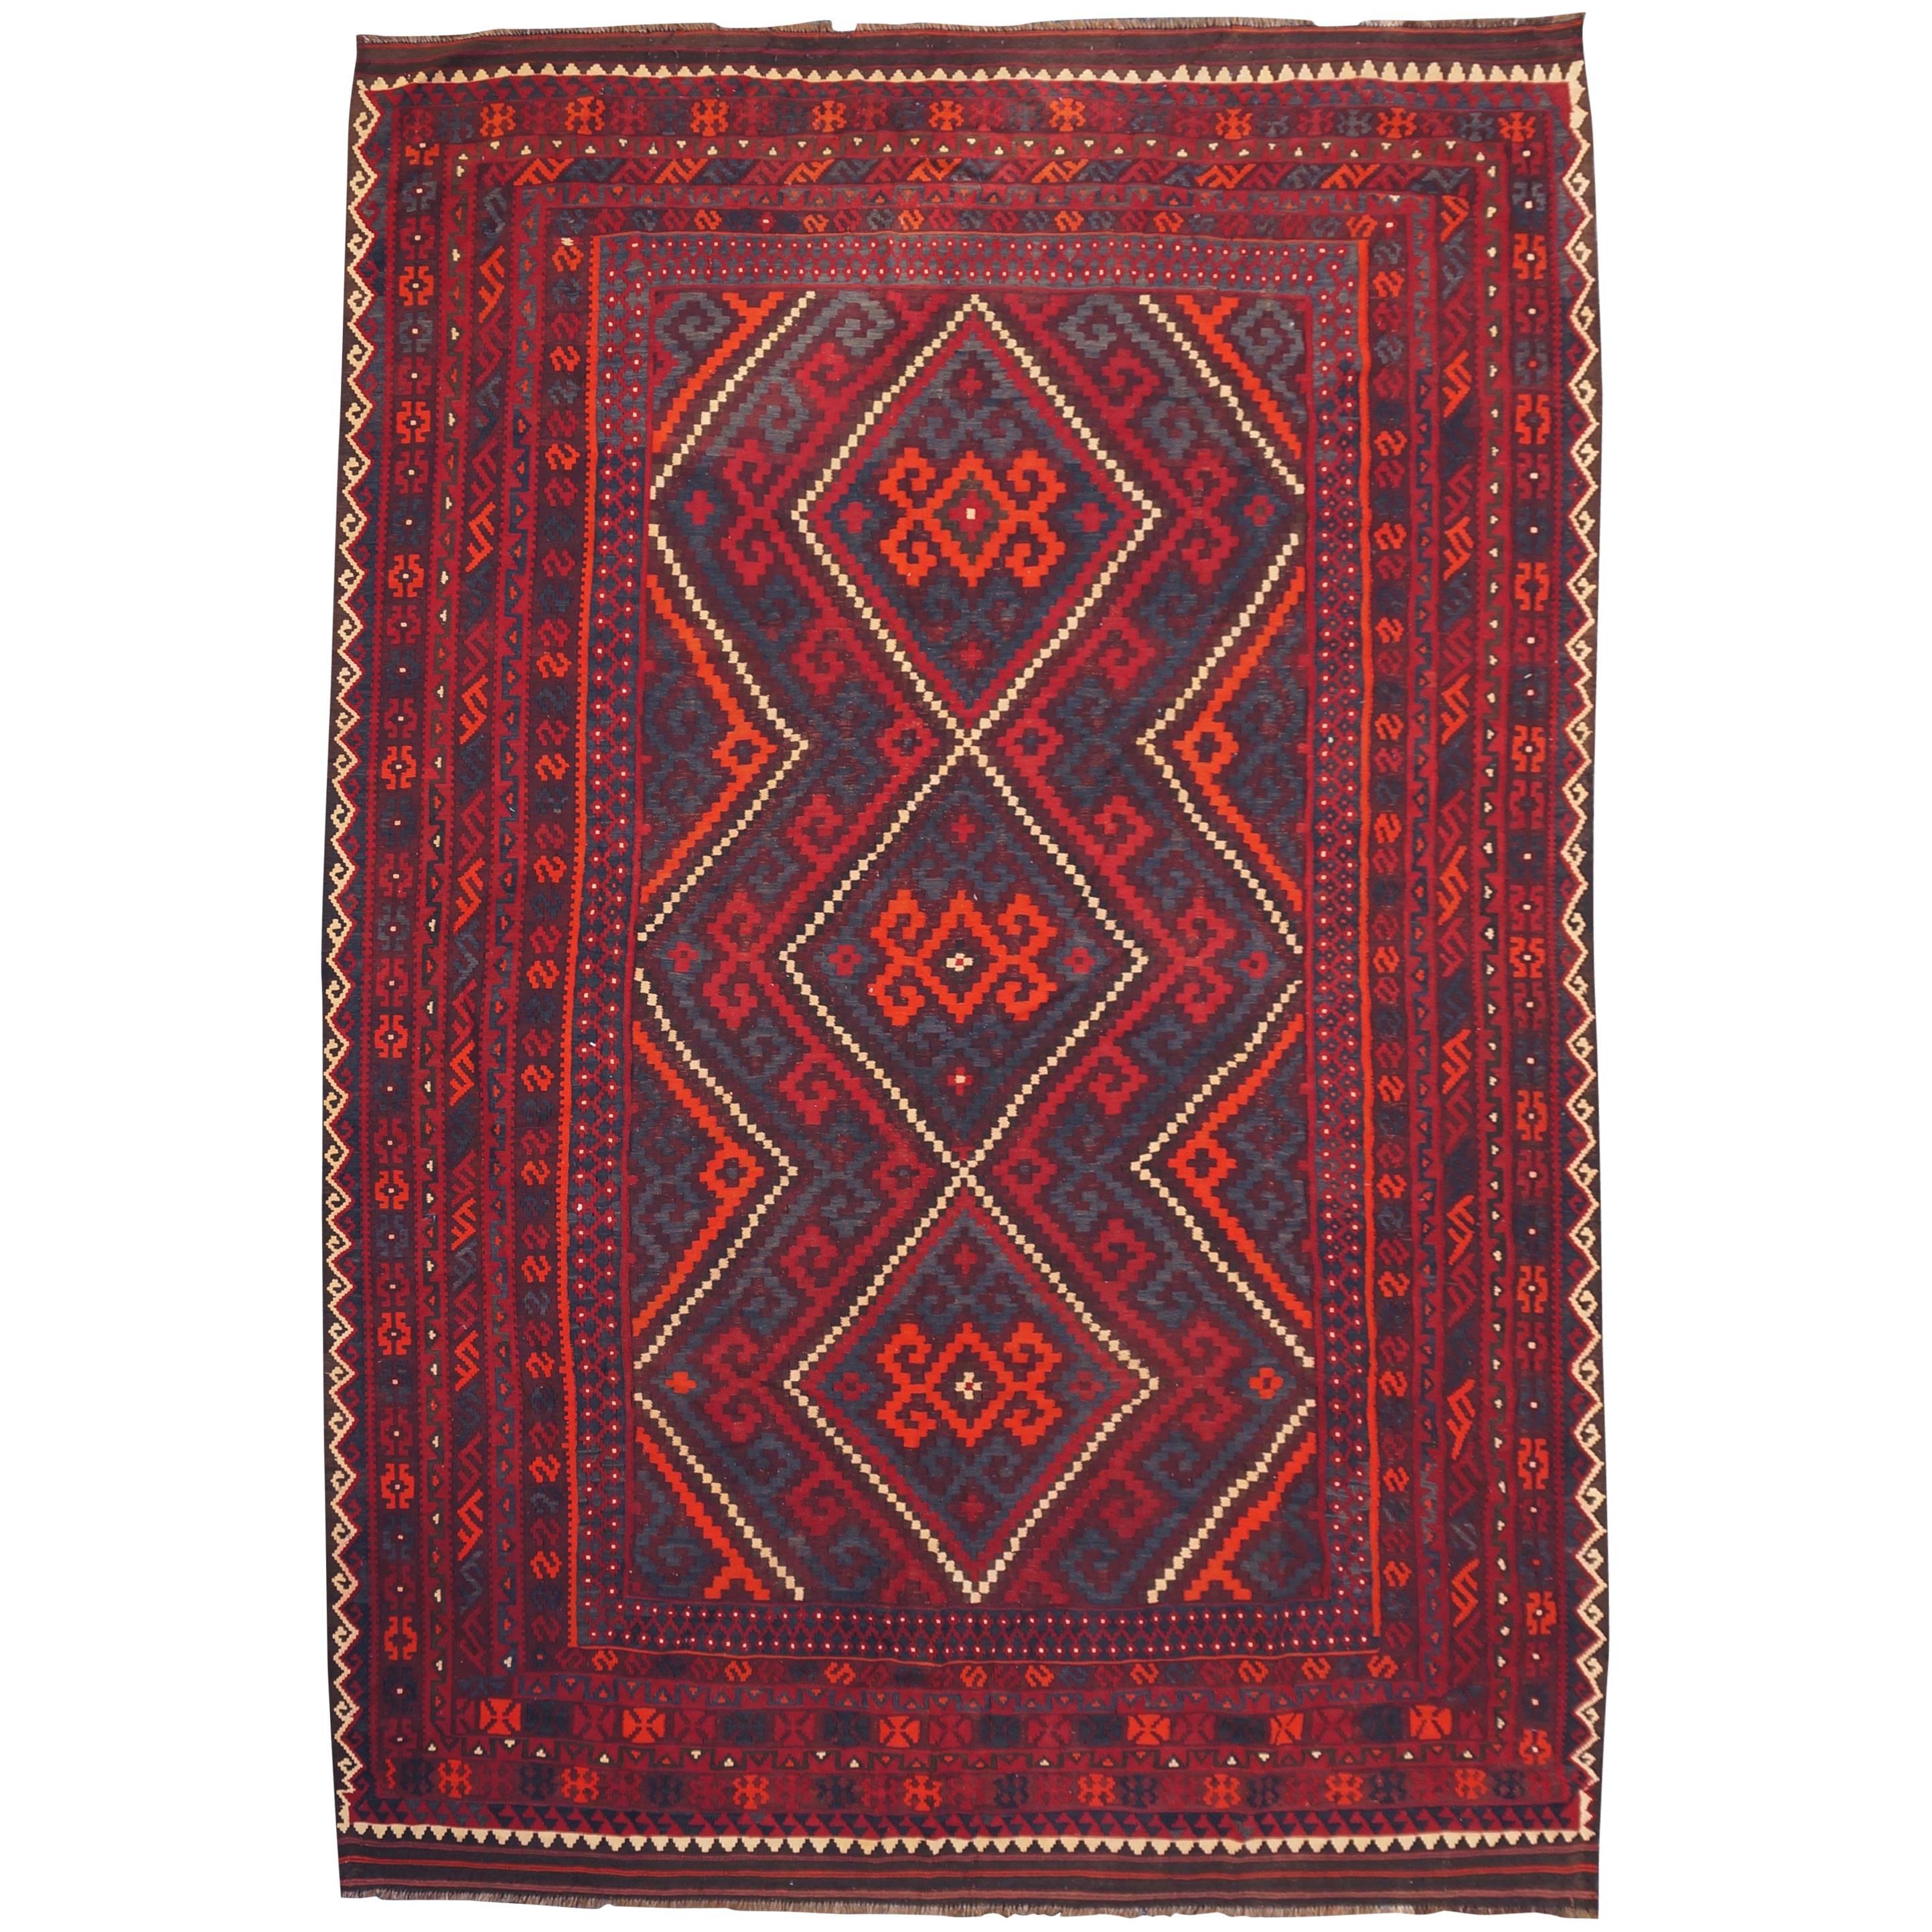 Carpet from Afghanistan